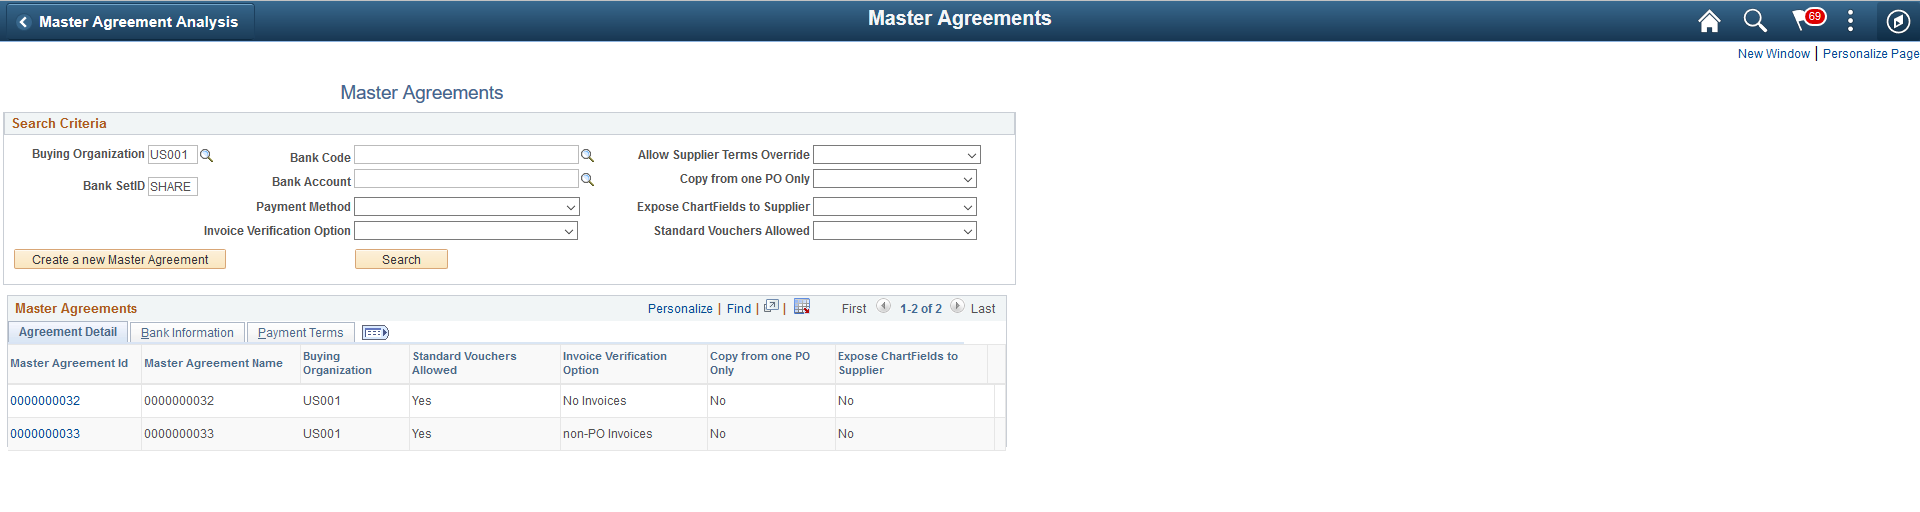 Master Agreements page